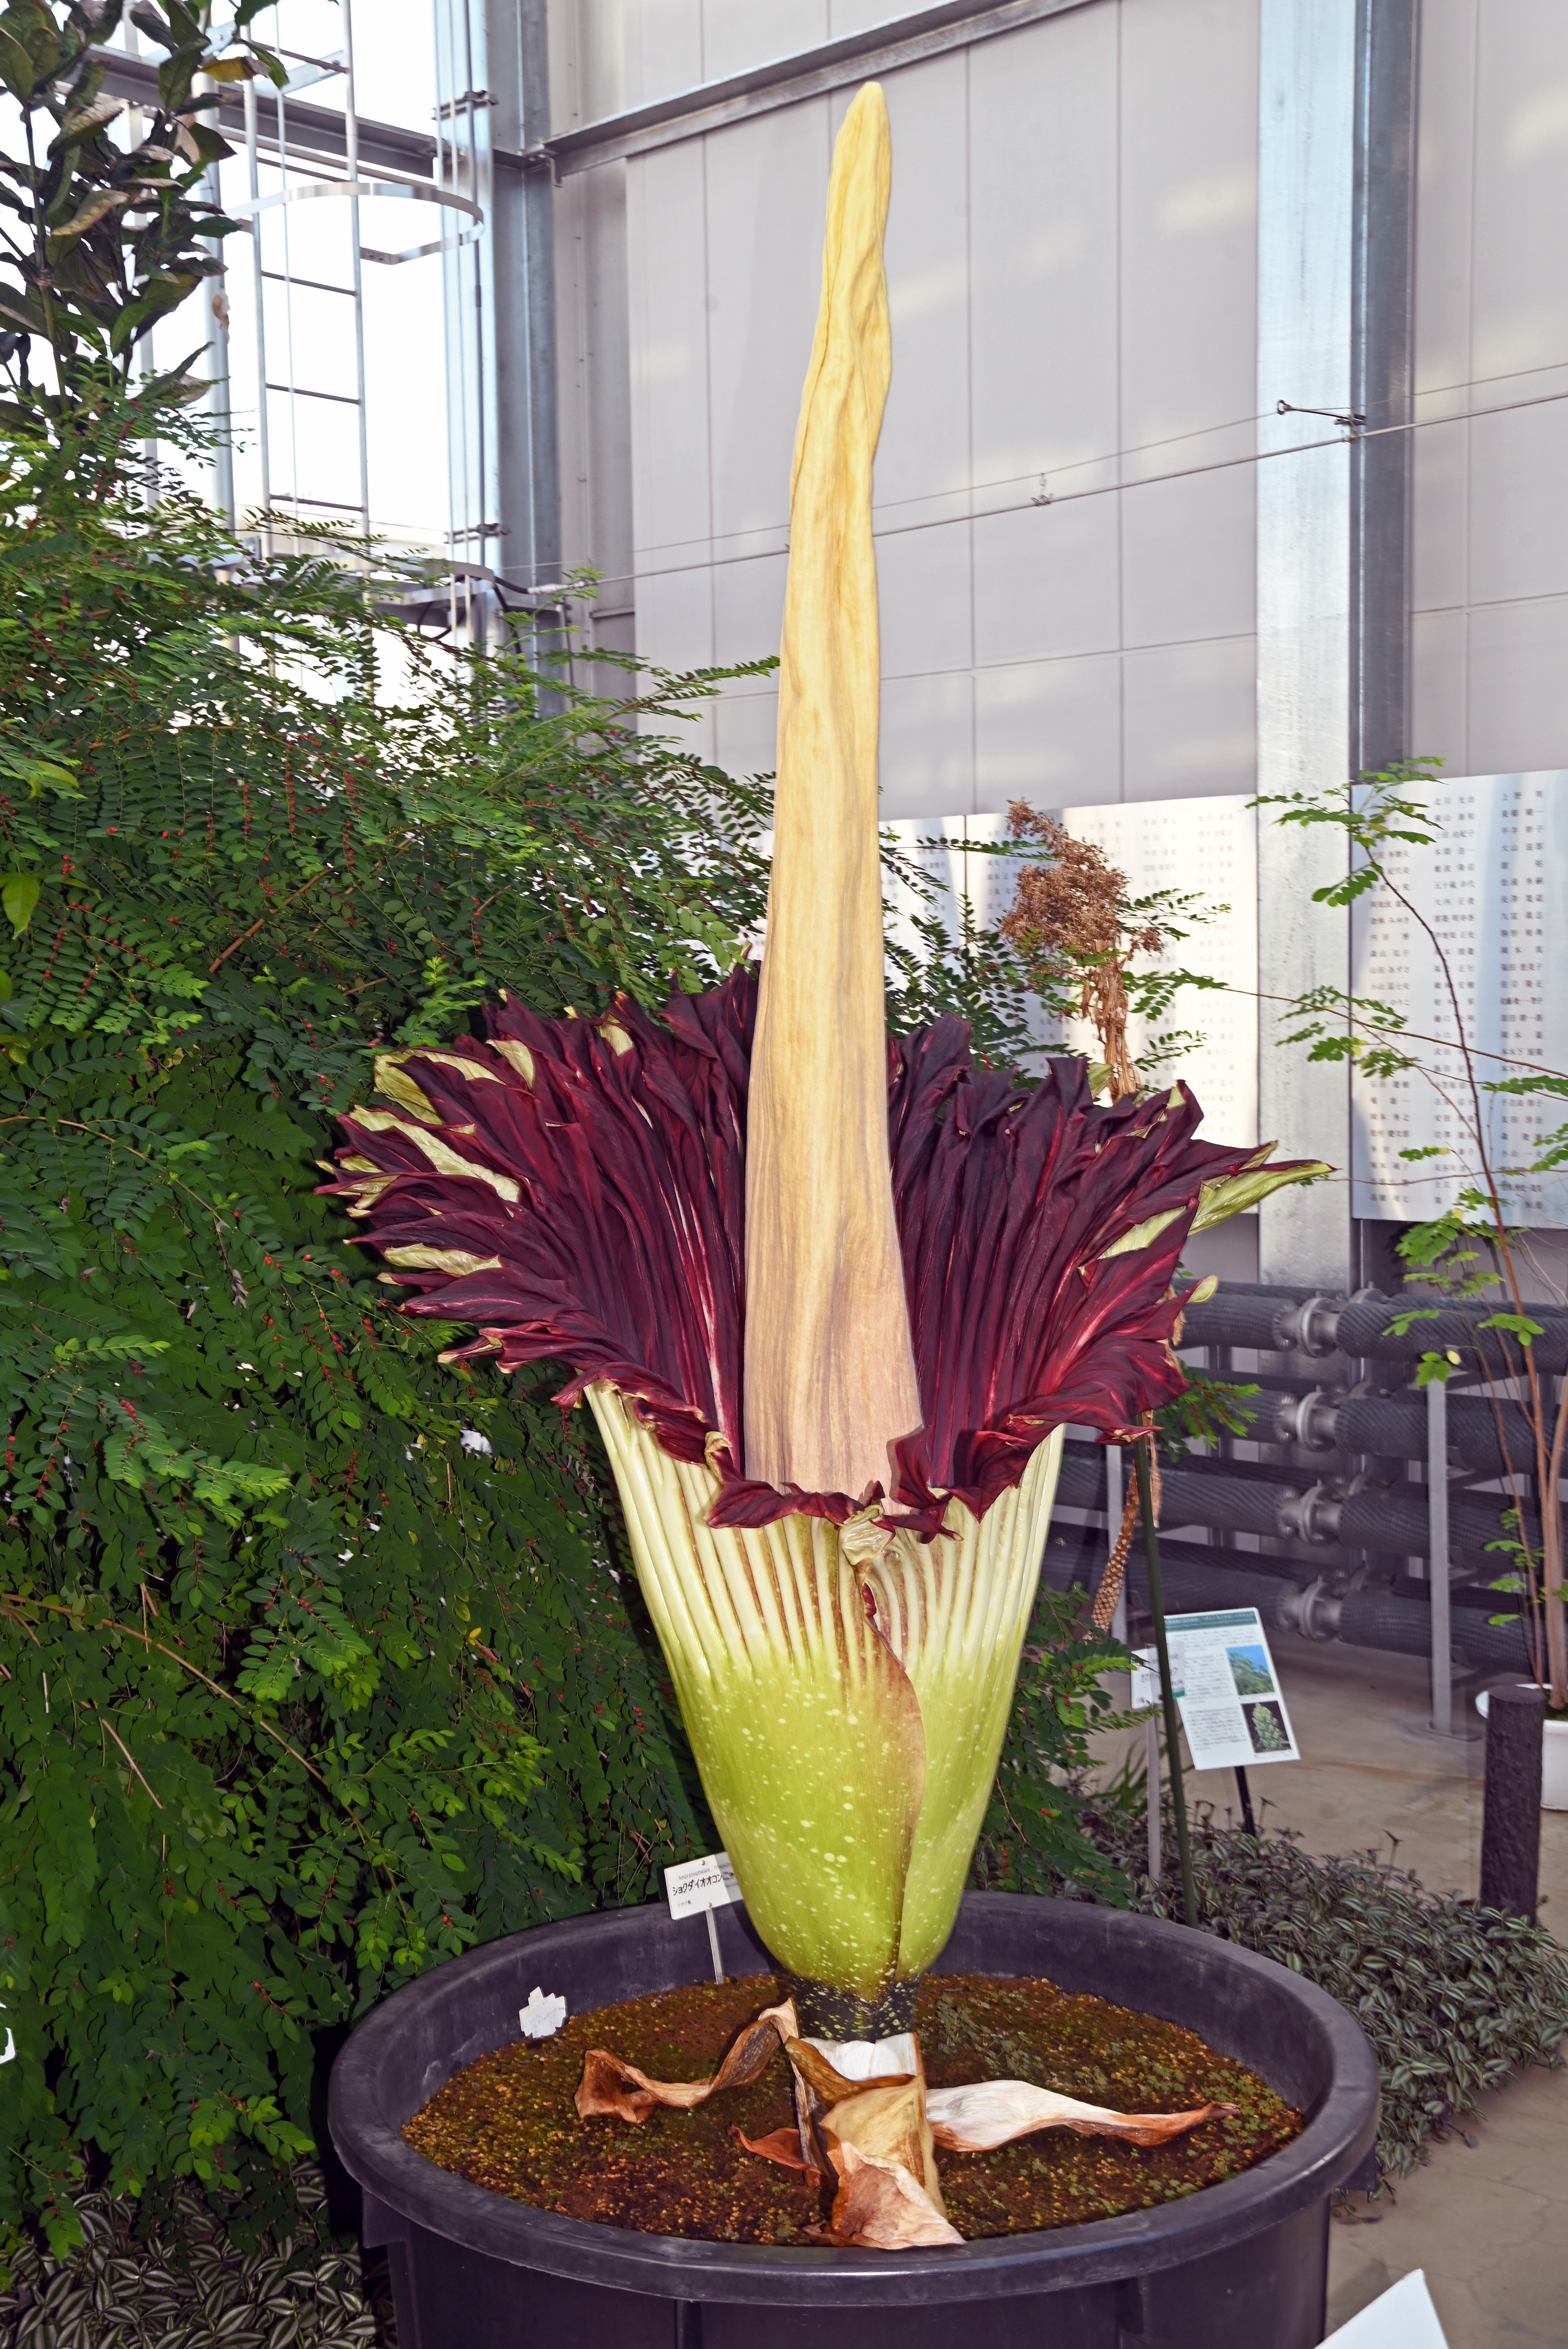 Amorphophallus titanum blooms for the first time in 13 years